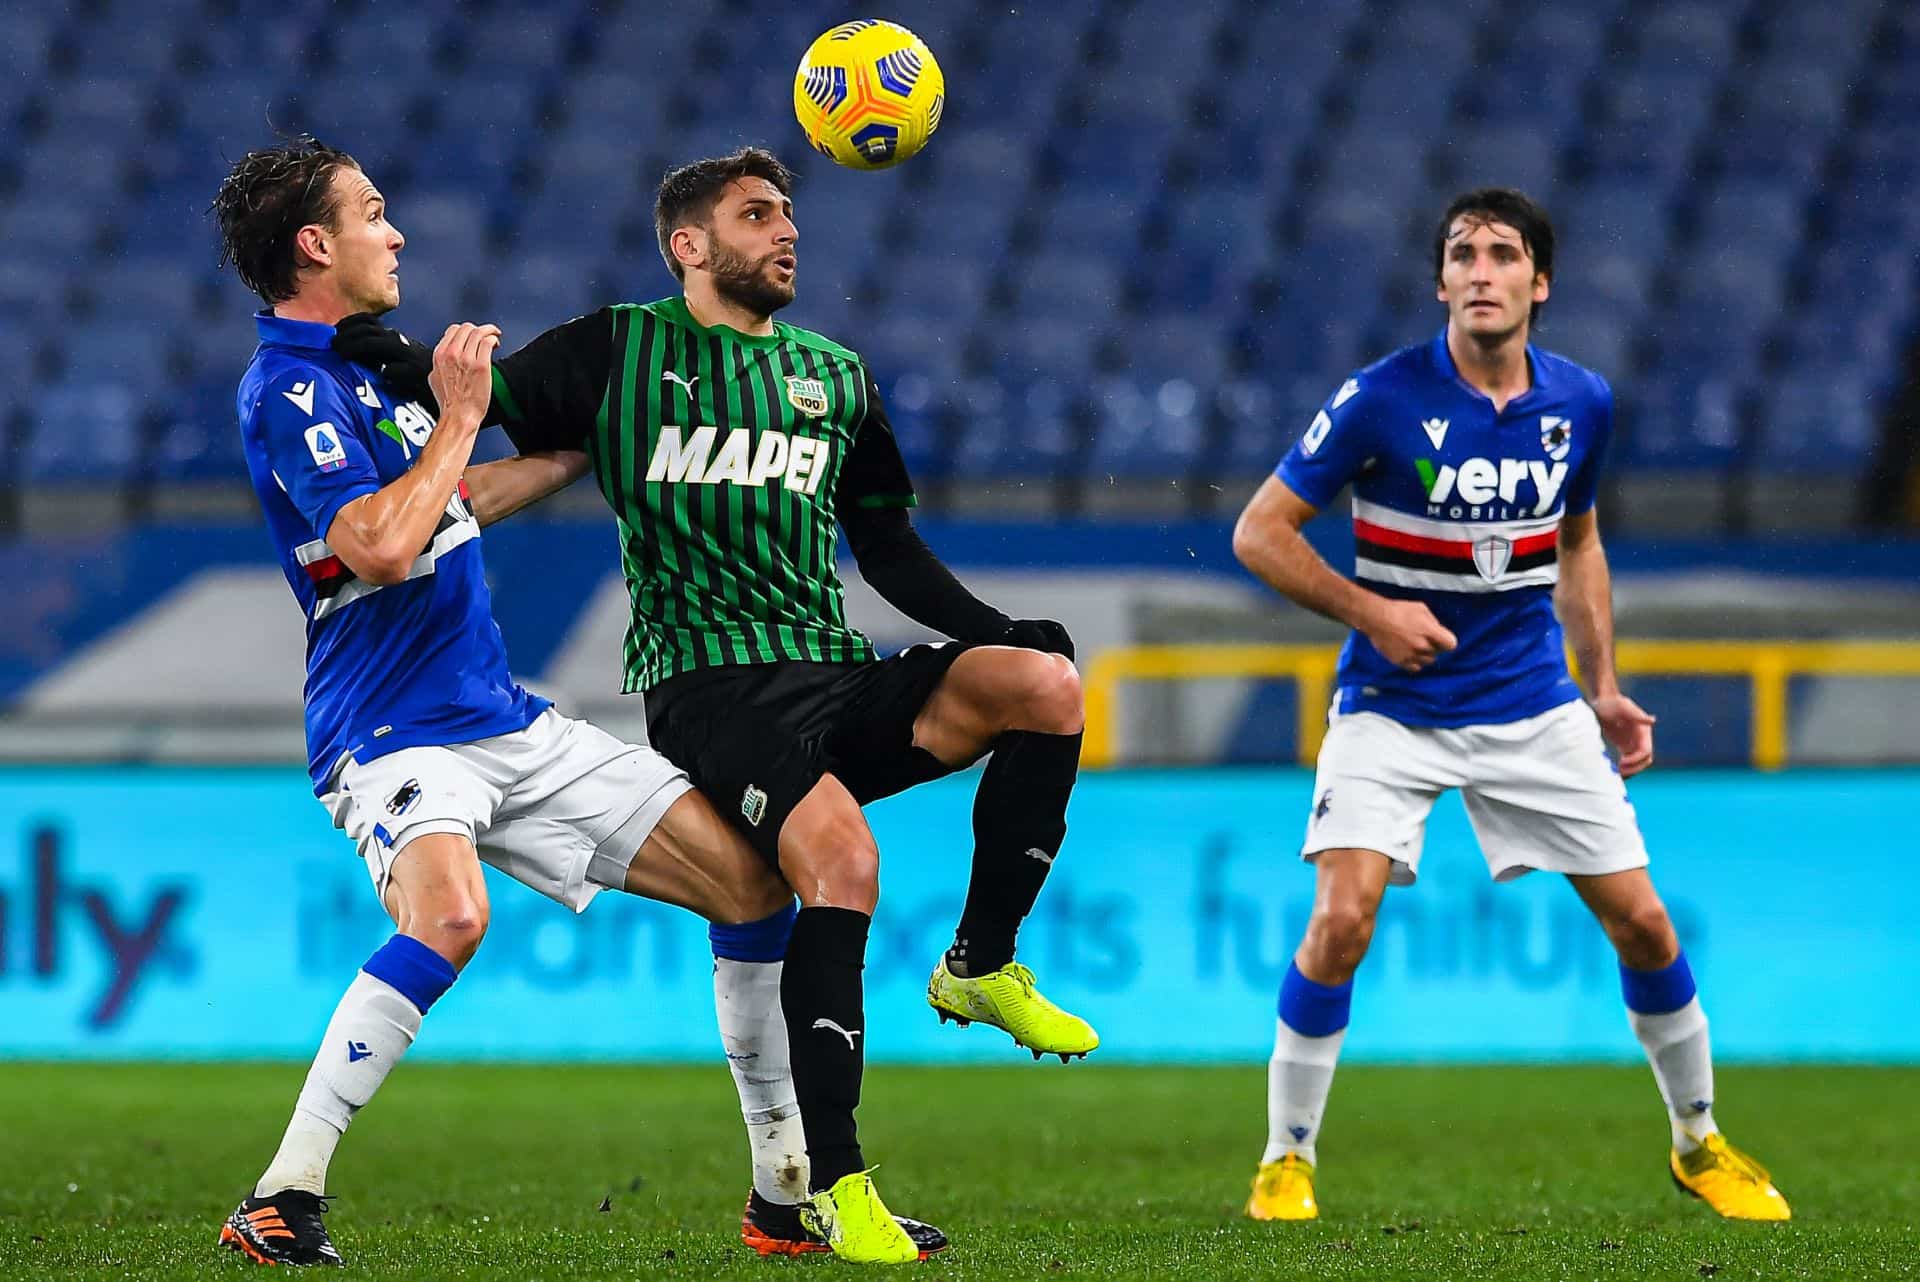 Sassuolo vs Sampdoria Preview, Tips and Odds - Sportingpedia - Latest Sports News From All Over the World